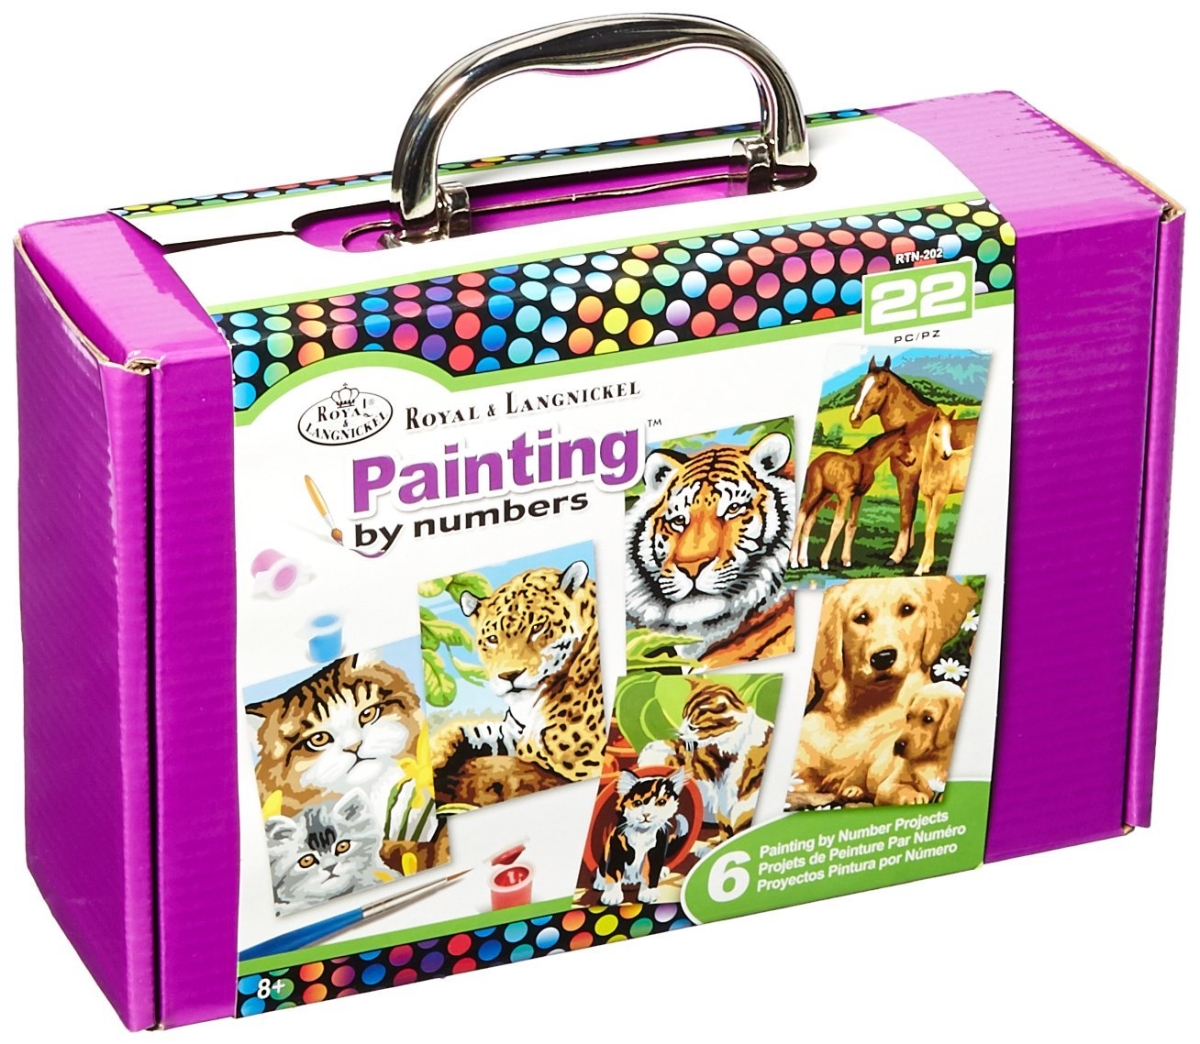 Rtn-202 Painting By N-color Activity Box Kit